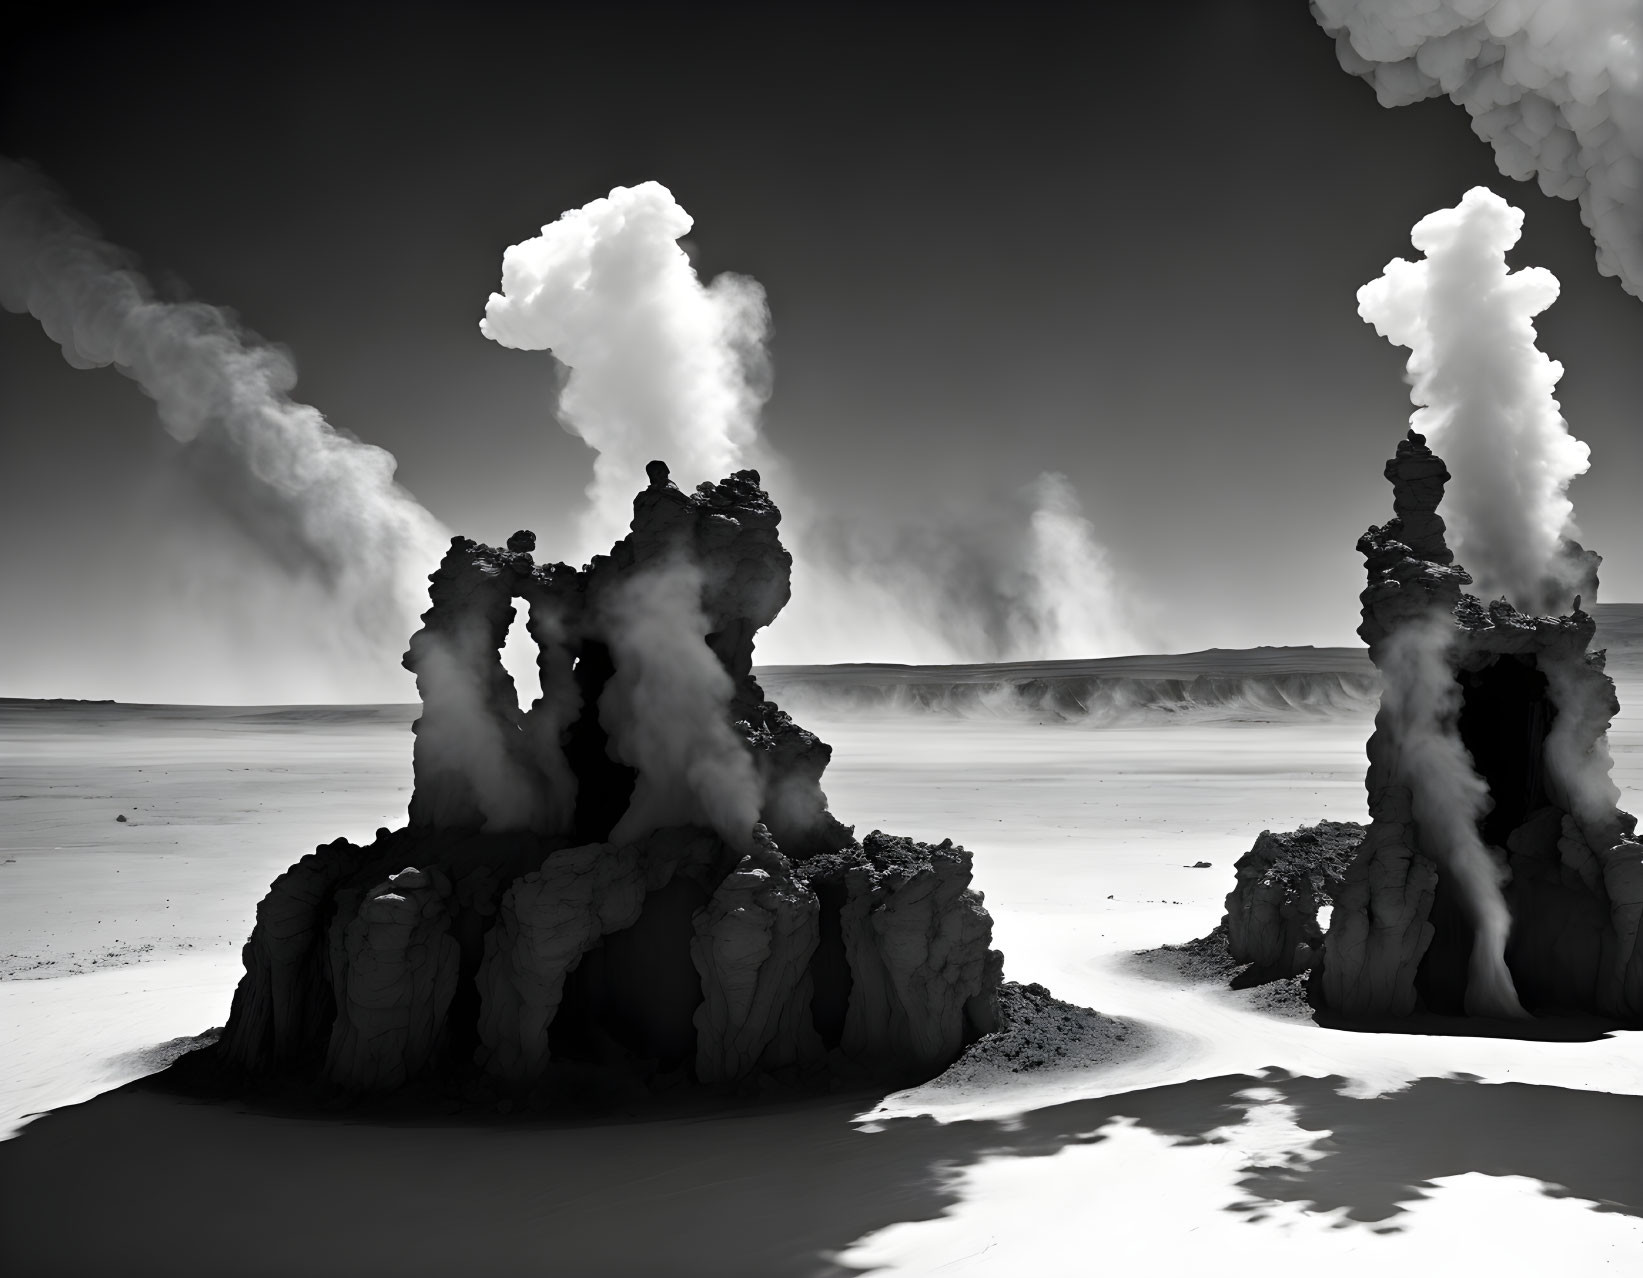 Dramatic monochrome desert landscape with smoke plumes and rock formations